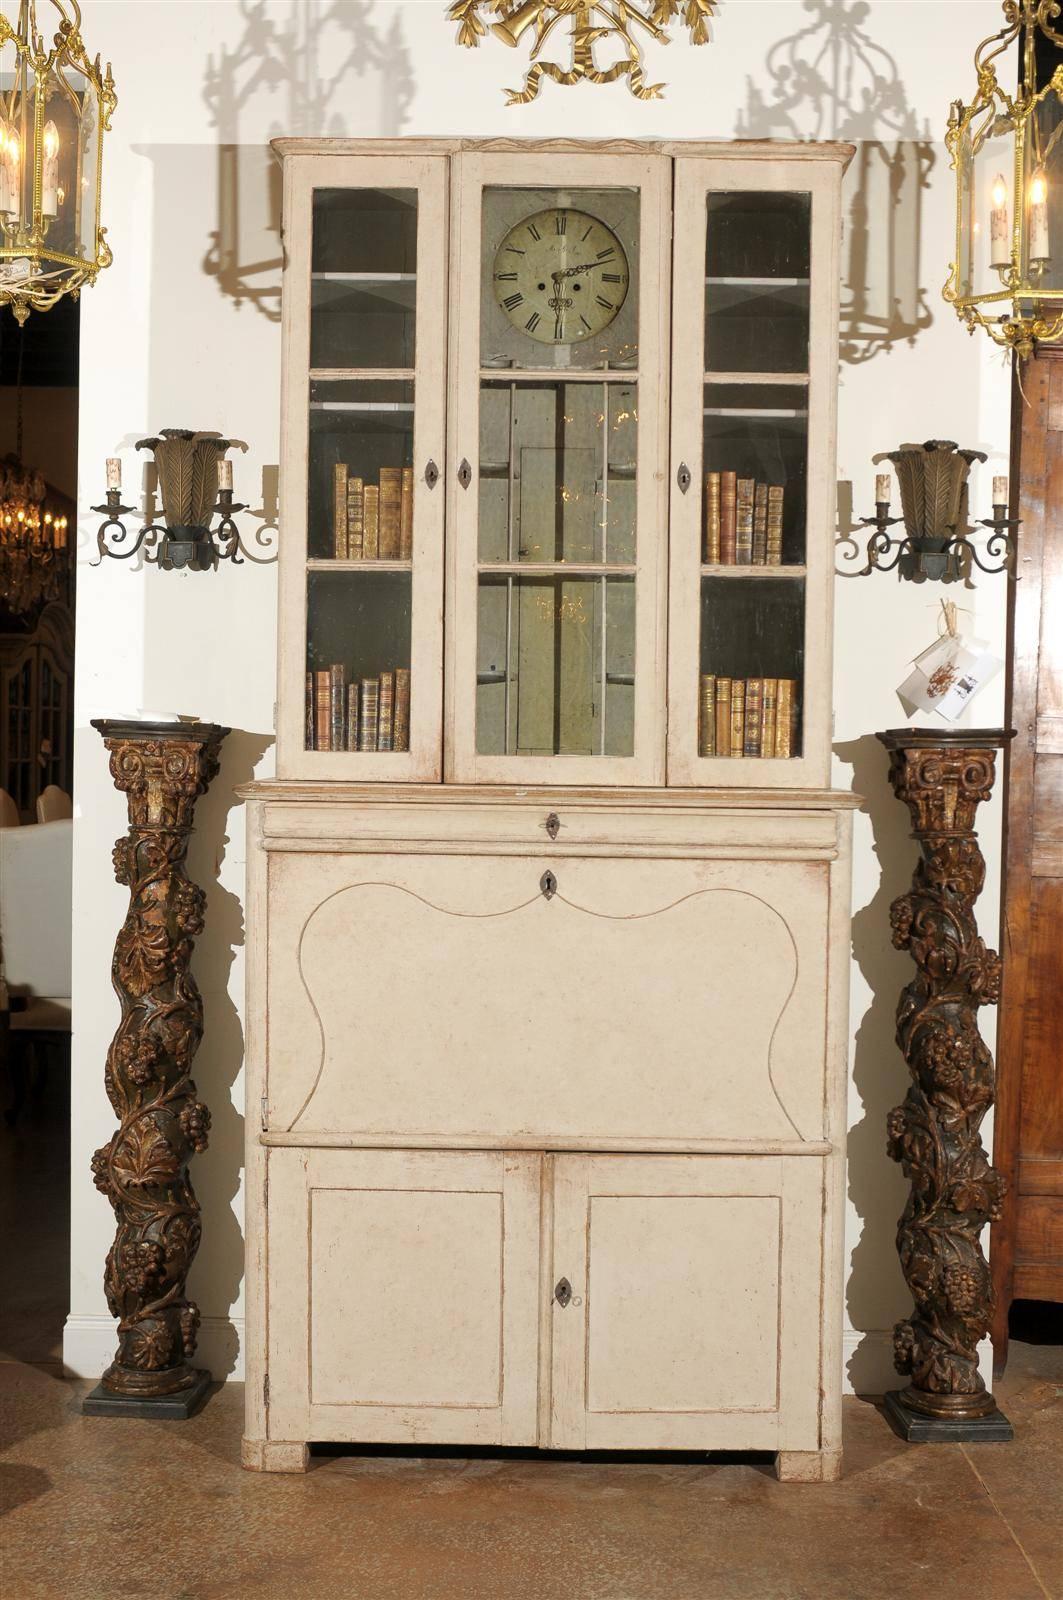 Swedish 19th century clock cabinet with three glass doors over a compartimilized fall front desk and lower two-door cabinet. Signed "Olof Mansson Snickare" and dated 1878. Made in Farlila, Halsingland. Original clock mechanism, locks and